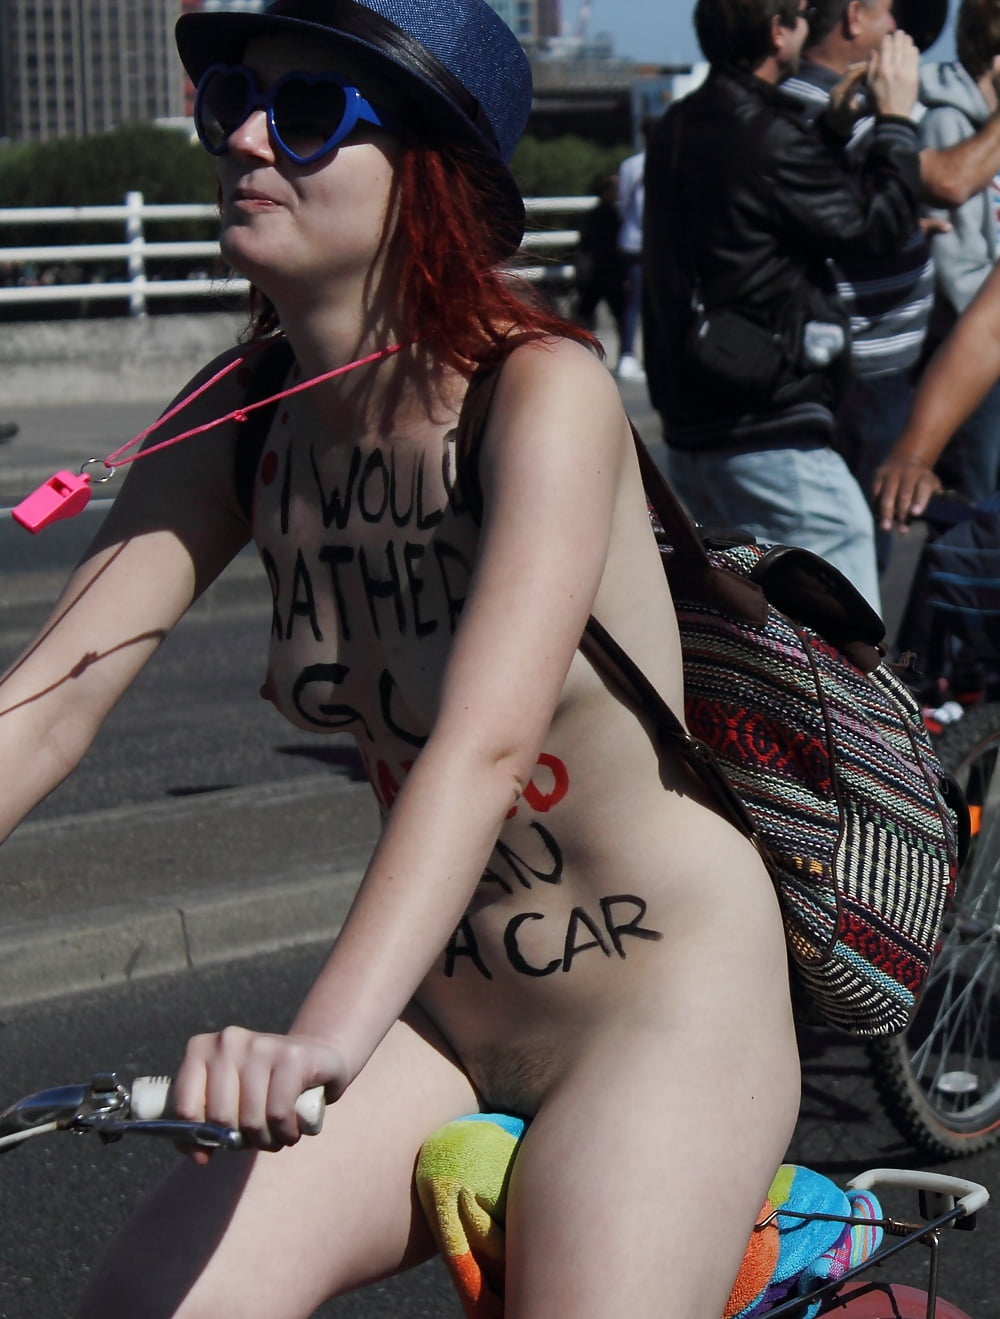 Free Naked bike ride tits boobs pussies & cocks 2 photos